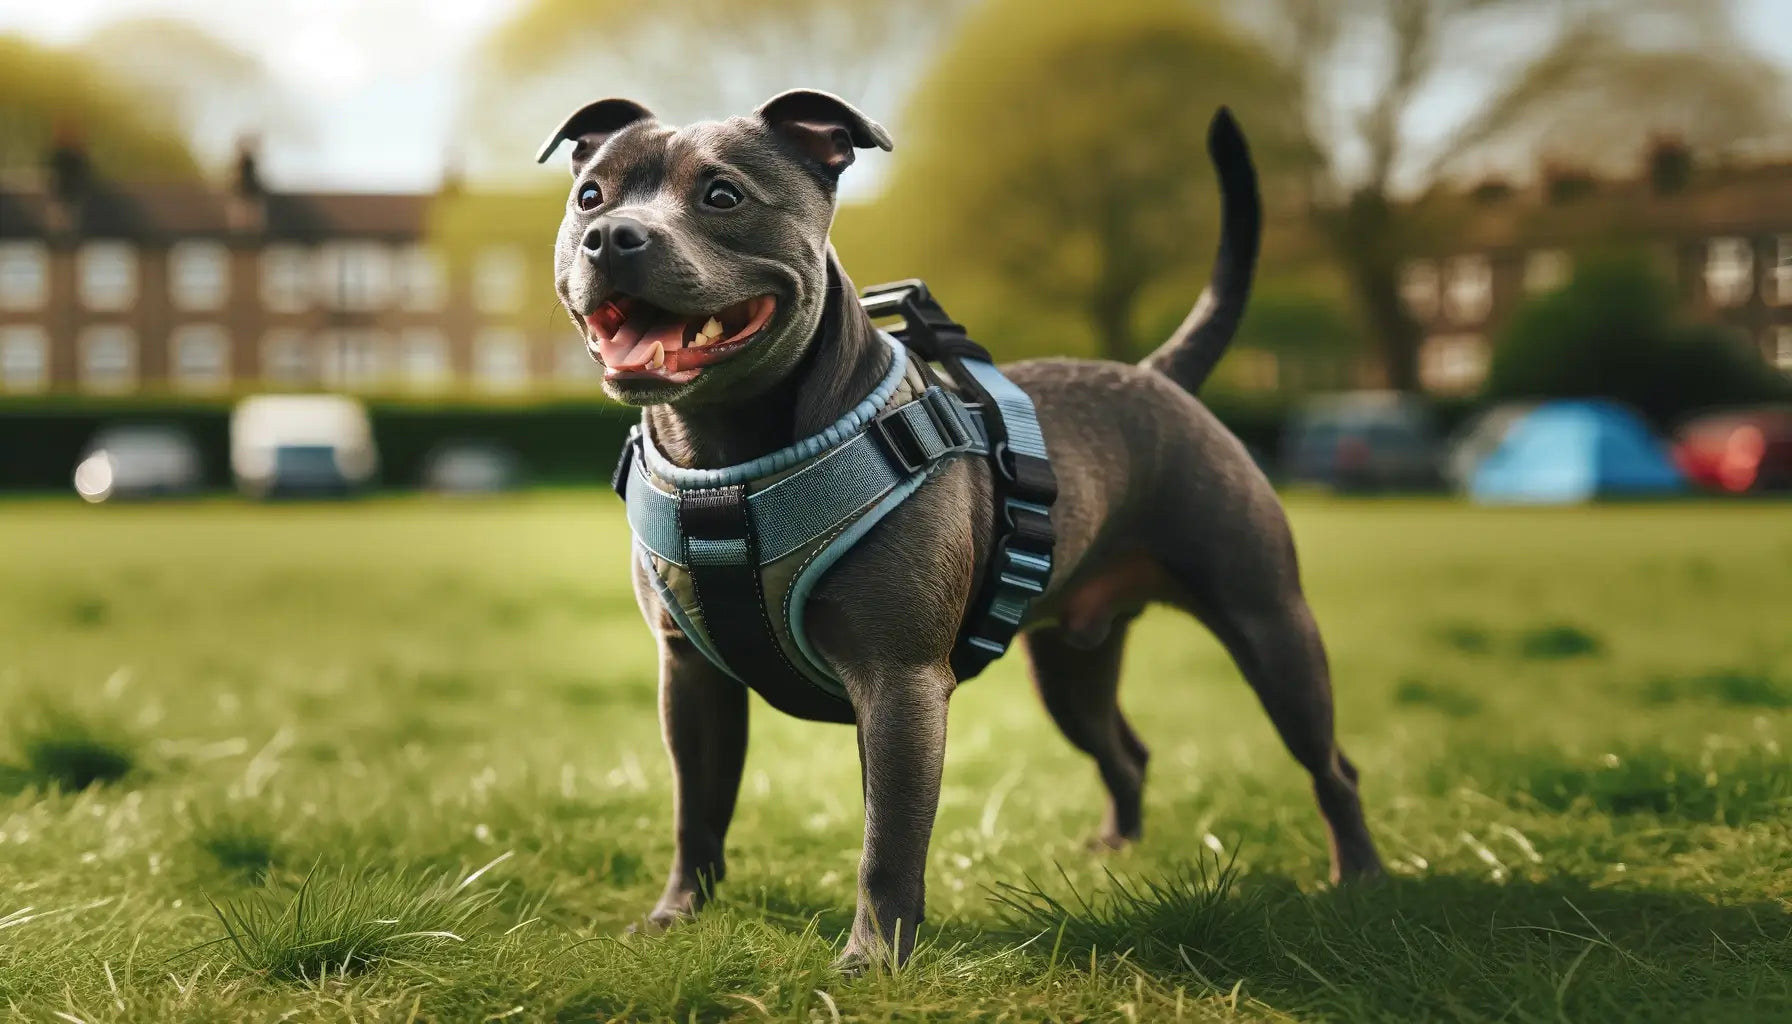 Blue Staffy standing on grass wearing a sturdy harness designed for walking or training.